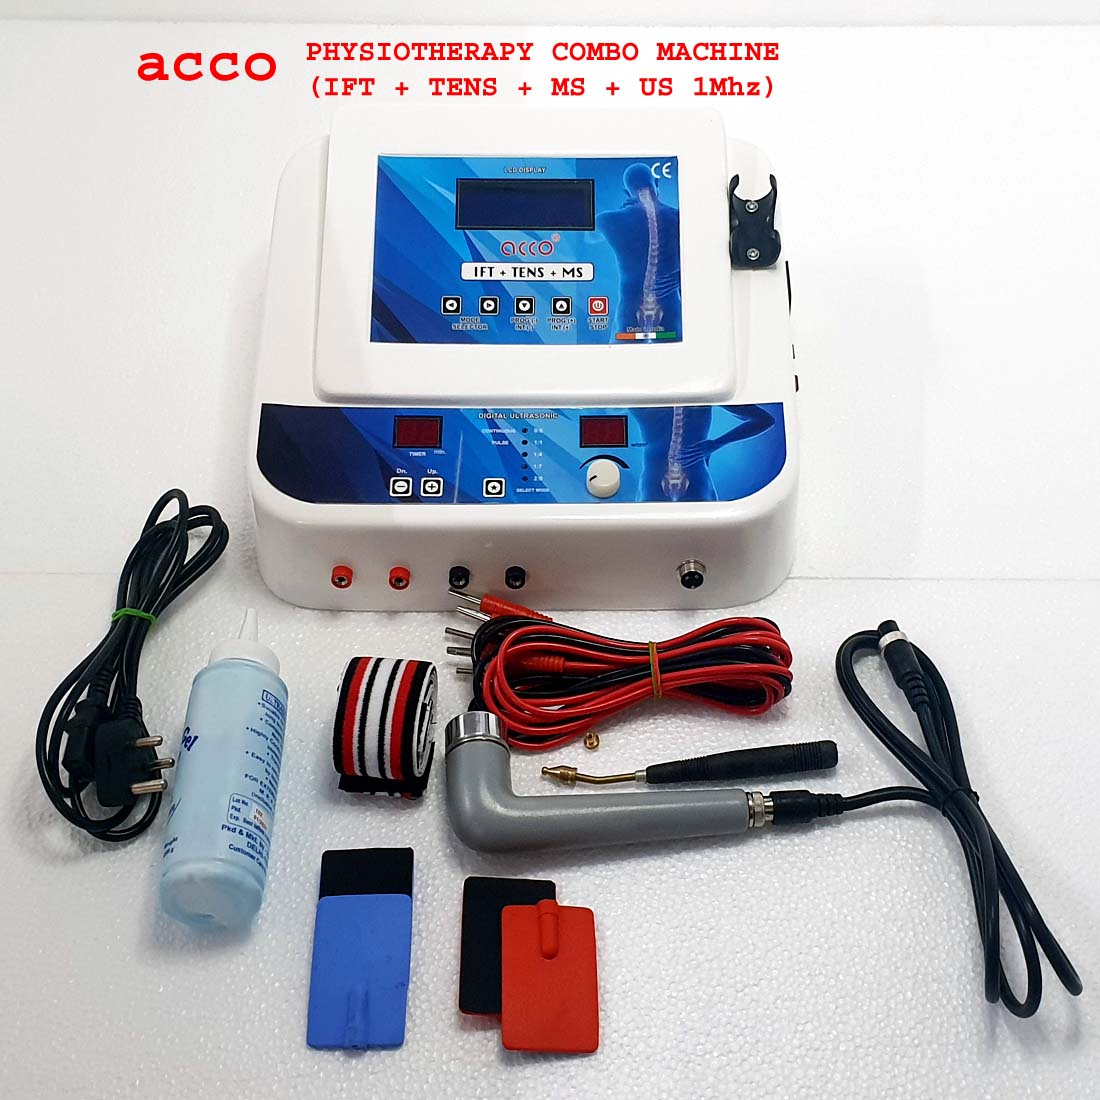 acco 4 in 1 Physiotherapy Combo IFT US MS TENS Combo Machine LCD 125 Programs